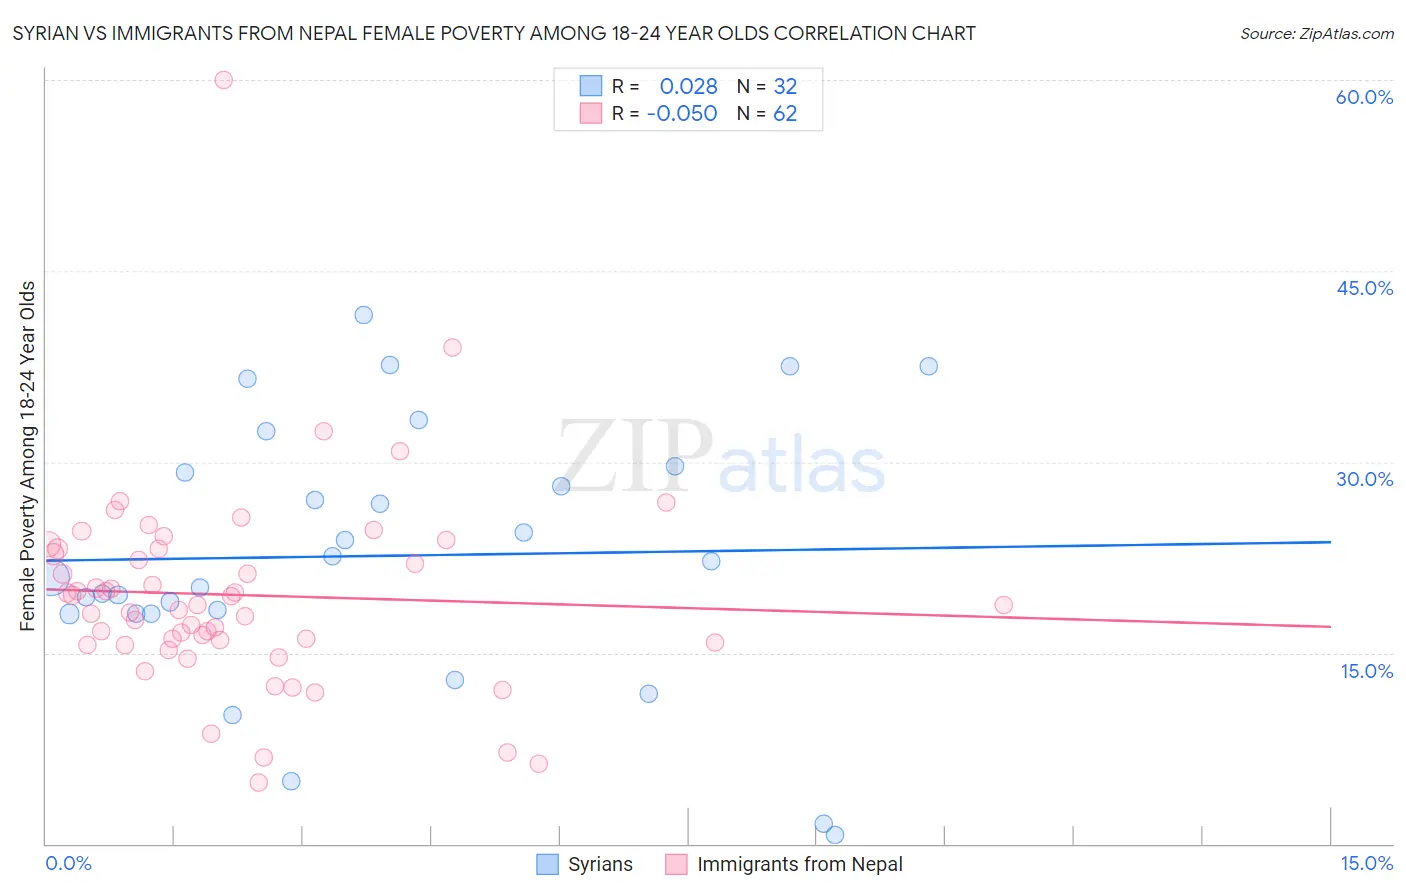 Syrian vs Immigrants from Nepal Female Poverty Among 18-24 Year Olds